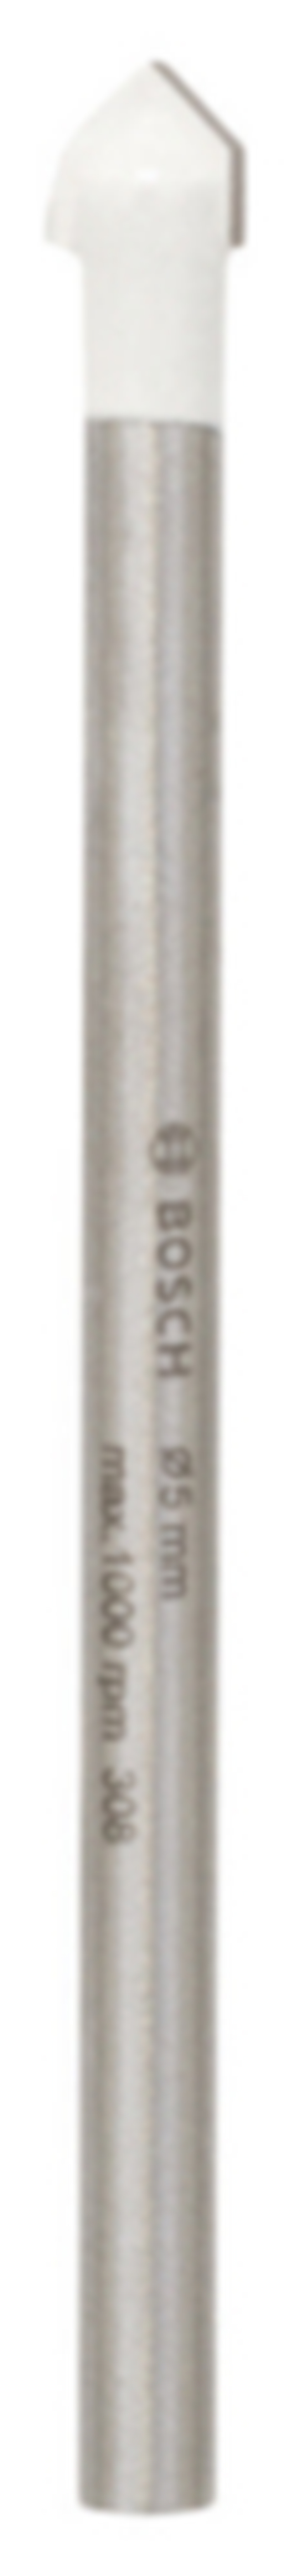 BOSCH ΤΡΥΠΑΝΙ ΠΛΑΚΙΔΙΩΝ CYL-9 5 X 70 MM